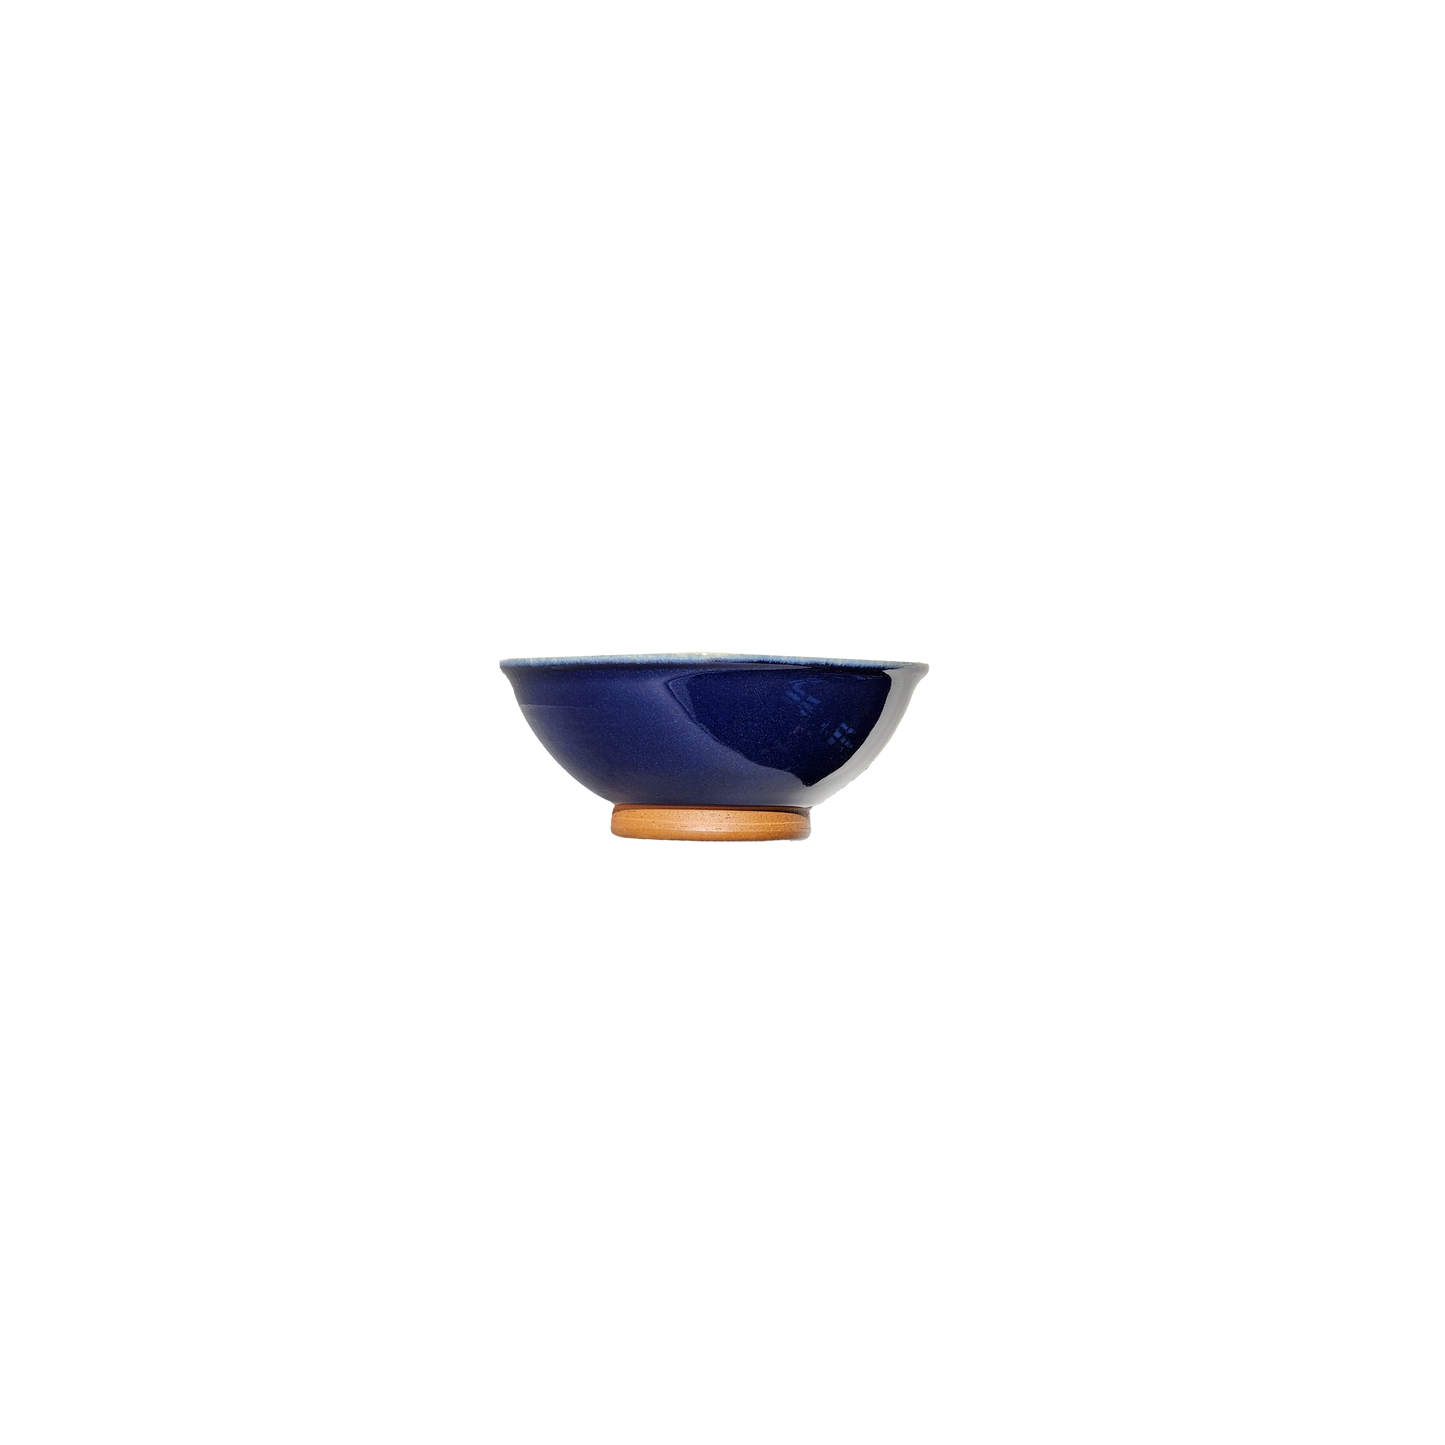 Image: Enhance your beverage service with this striking cobalt blue sugar bowl. Holds 4 ounces of sugar, adding a bold splash of color to your tea or coffee setup.